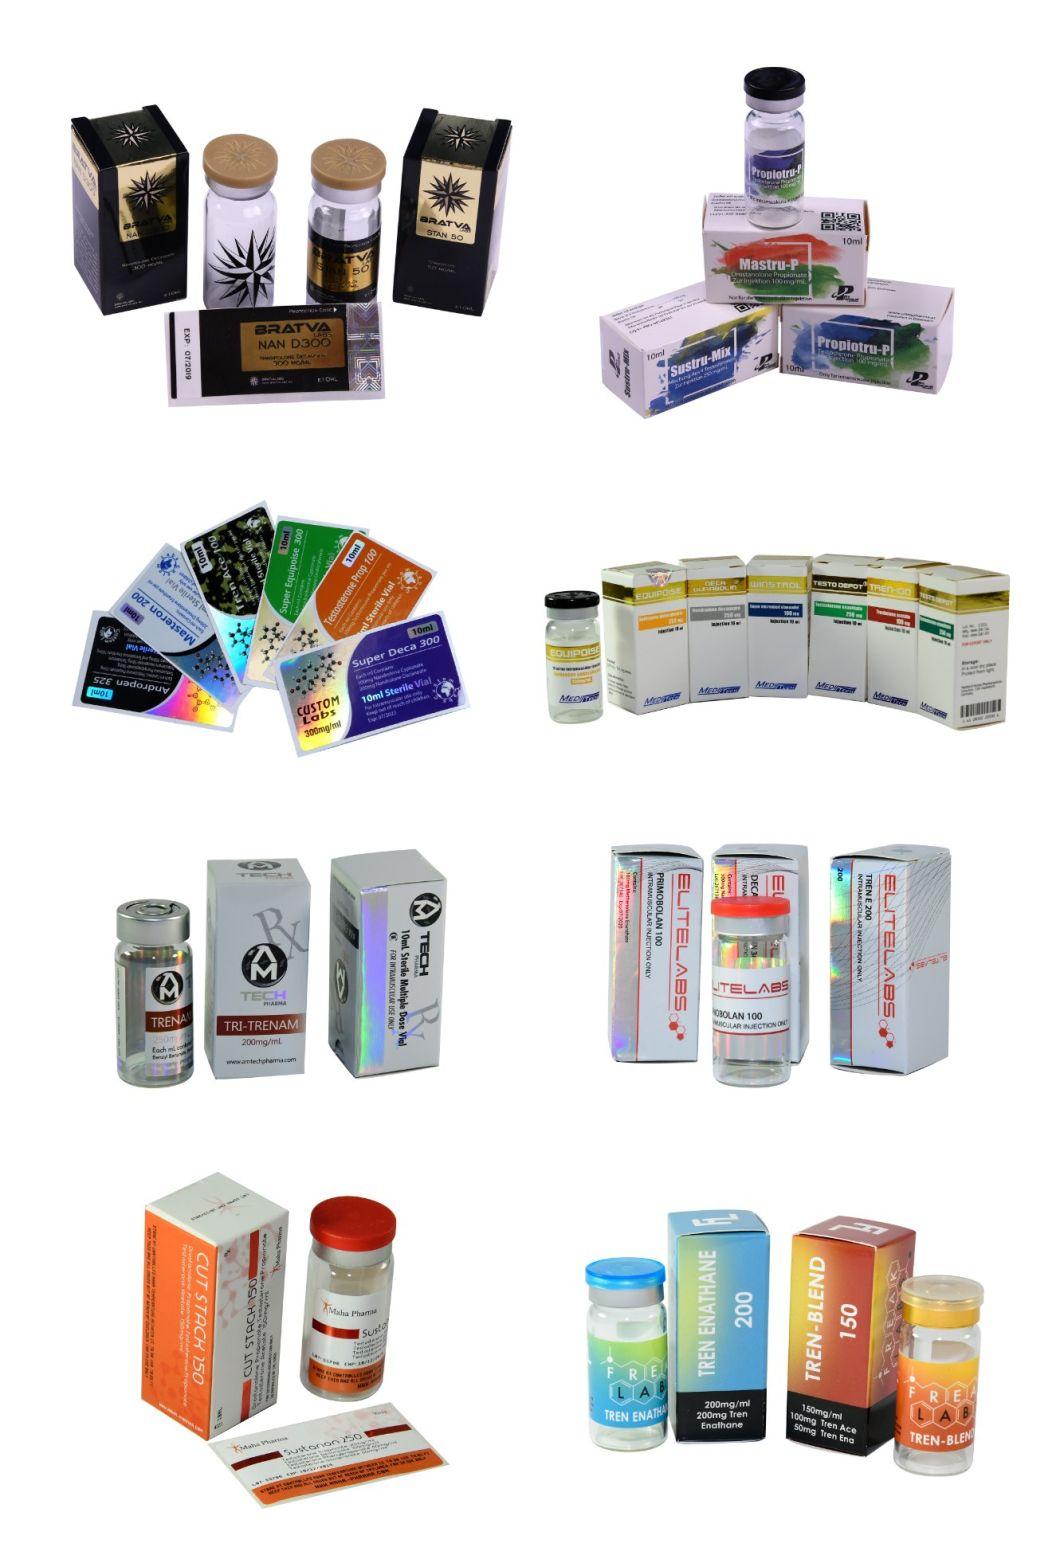 10ml Hologram Steroid Bottle Packaging 10ml Vial Labels and Boxes